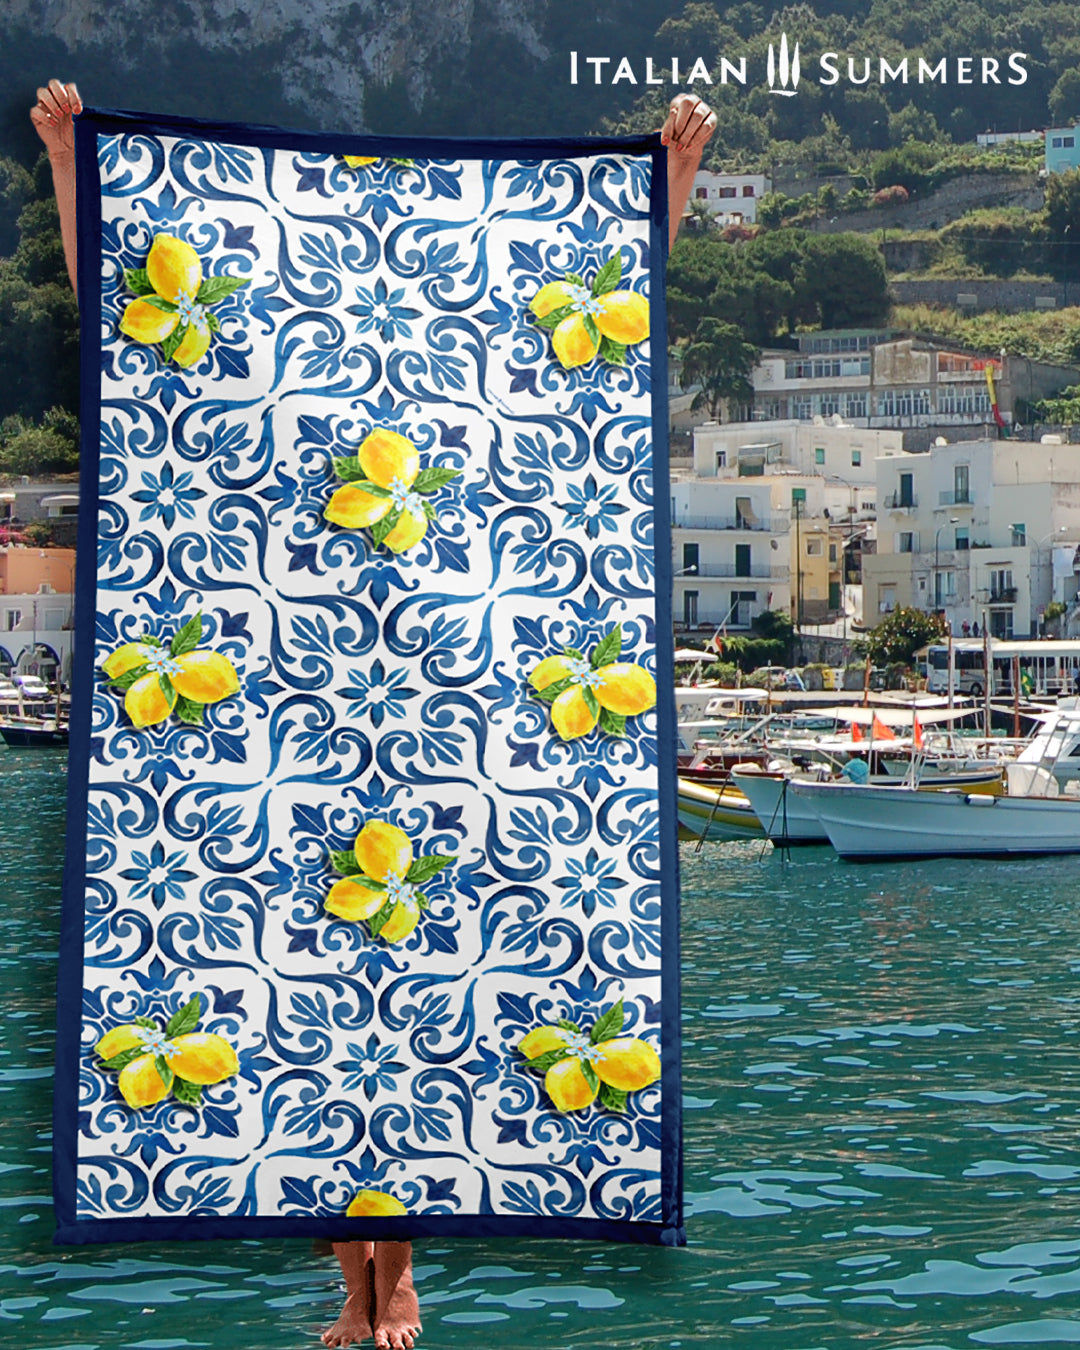 A beautiful Italy inspired beach towel printed with a pattern of blue Italian Maiolica tiles, a deep blue framing stripe and happy bunches of Sorrento lemons with flowers. Made by Italian Summers